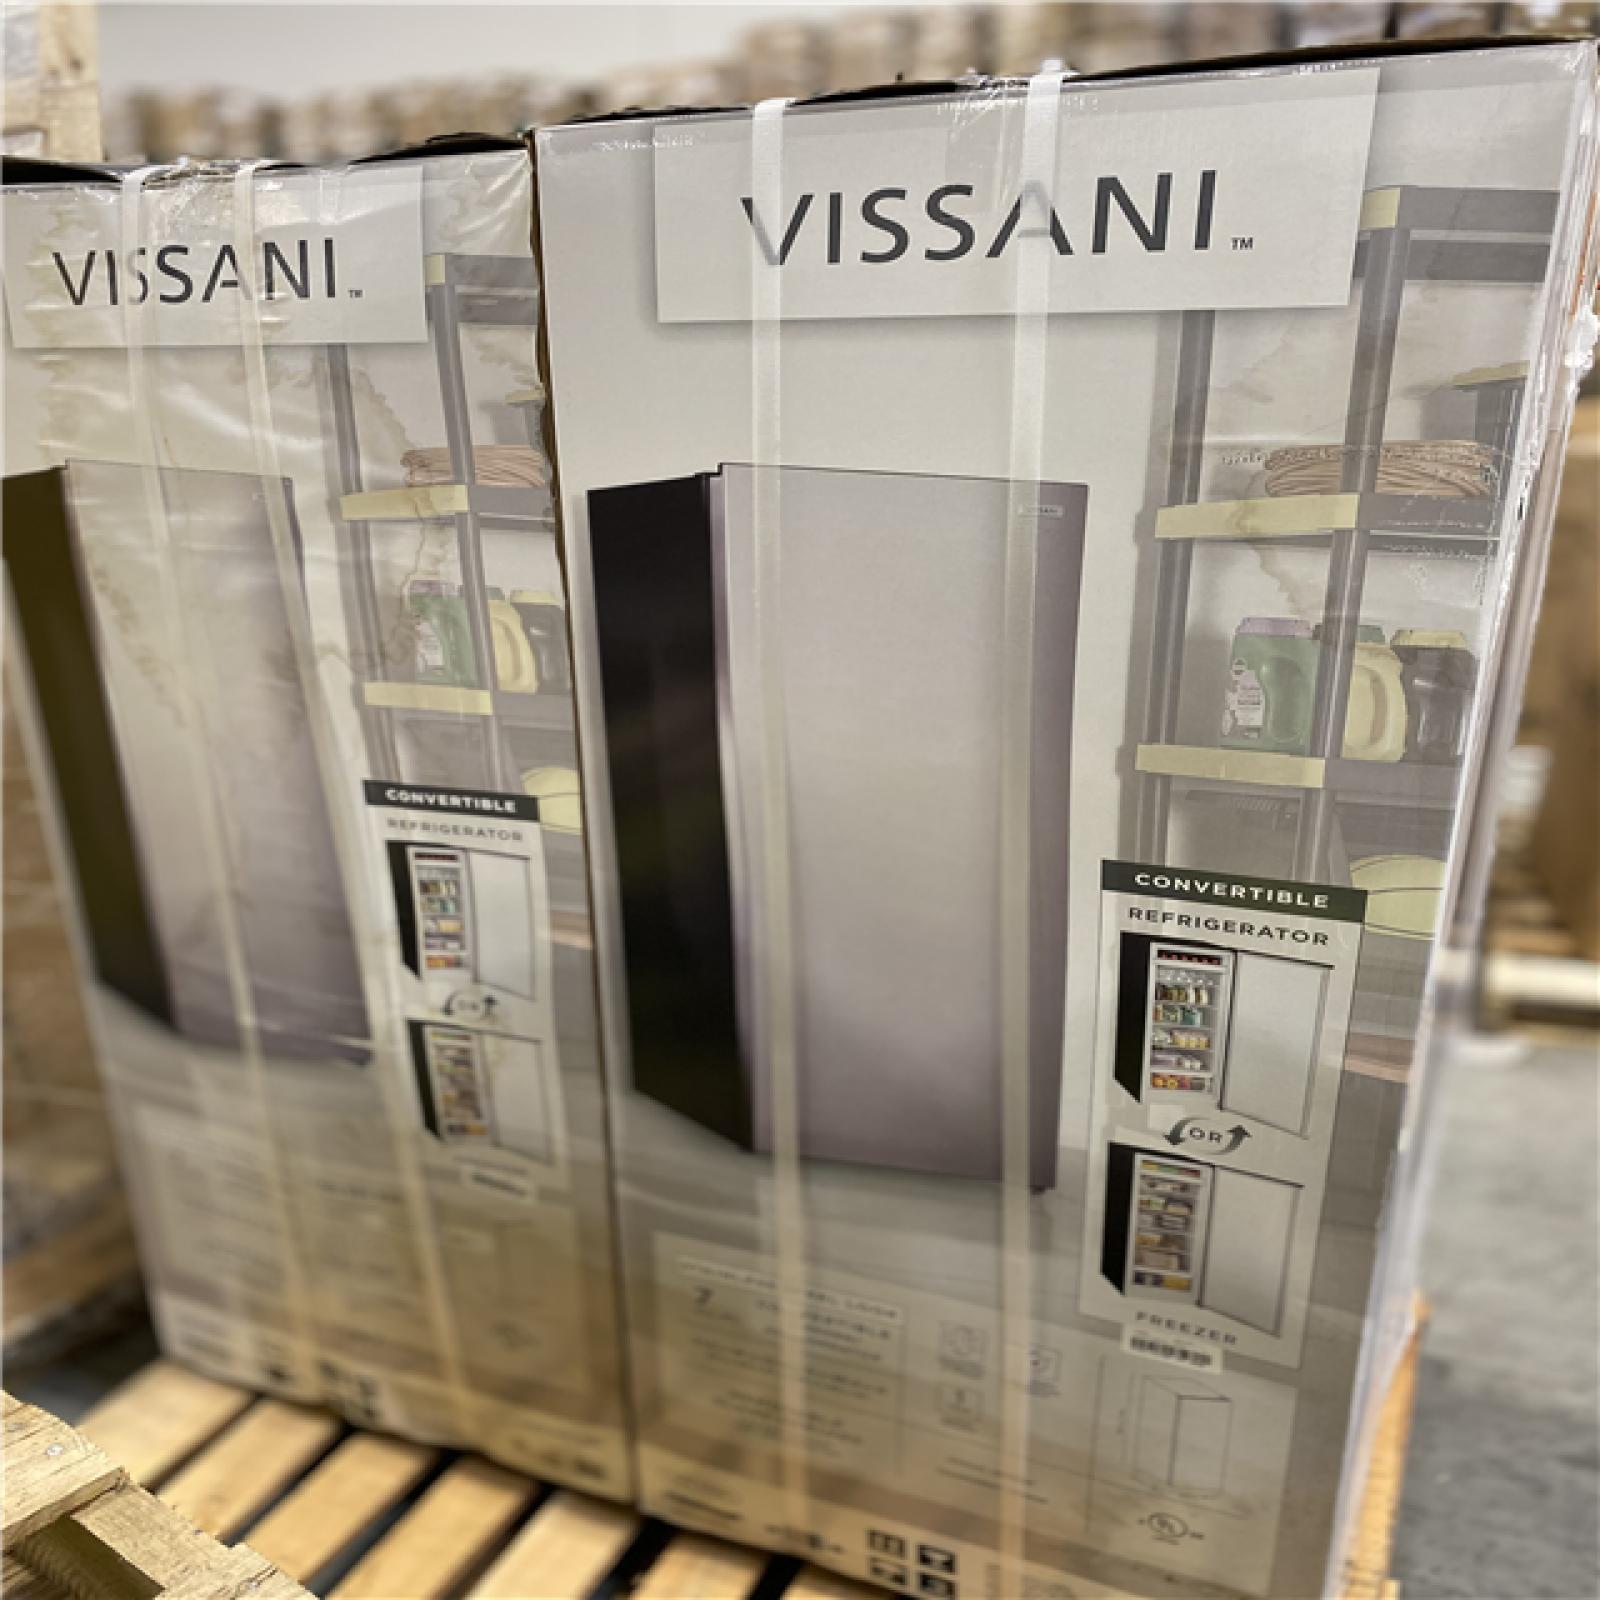 DALLAS LOCATION - Vissani 7 cu. ft. Convertible Upright Freezer/Refrigerator in Stainless Steel Garage Ready PALLET - (2 UNITS)